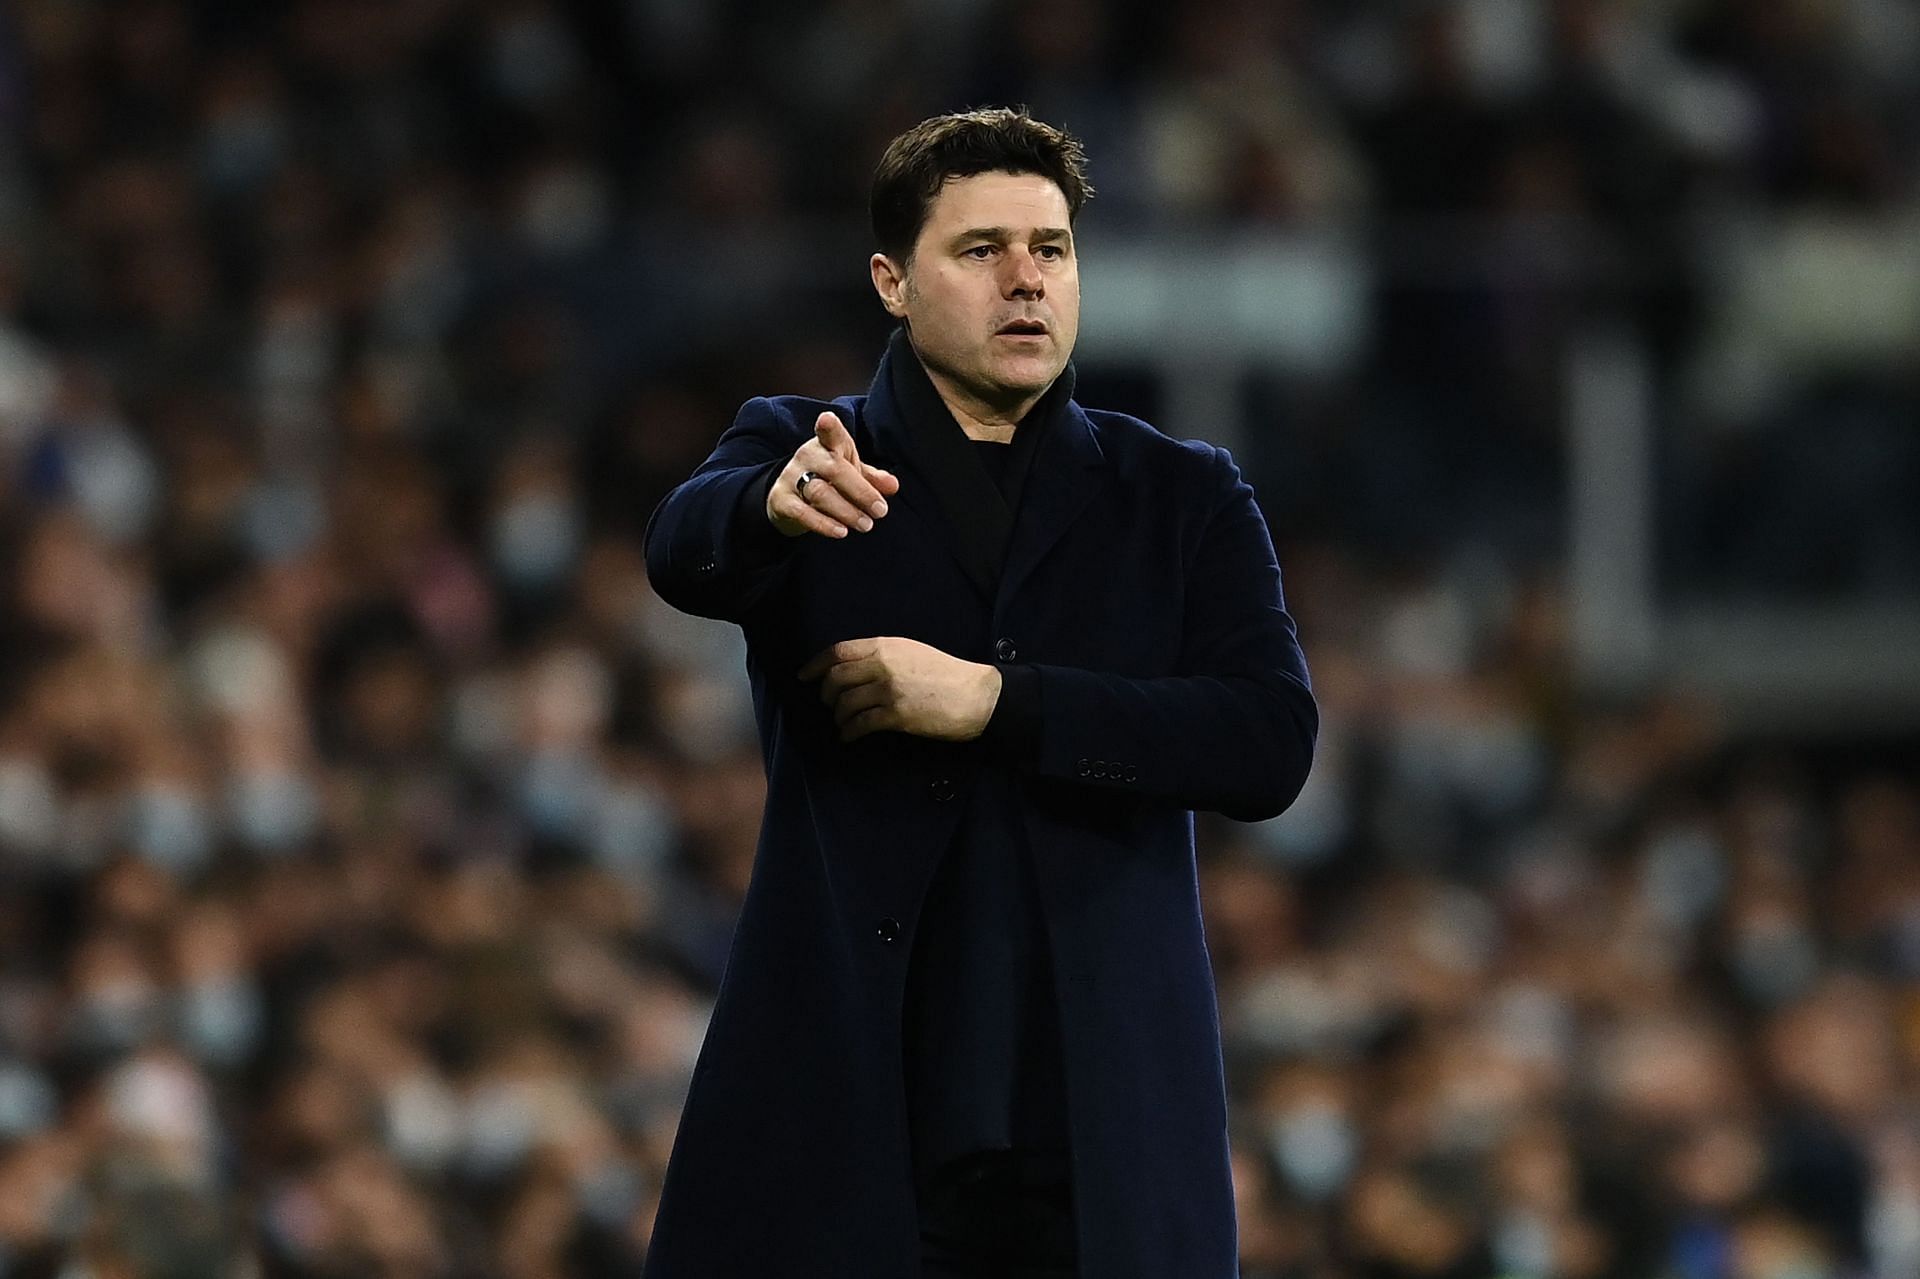 Pochettino could get Manchester United back on track